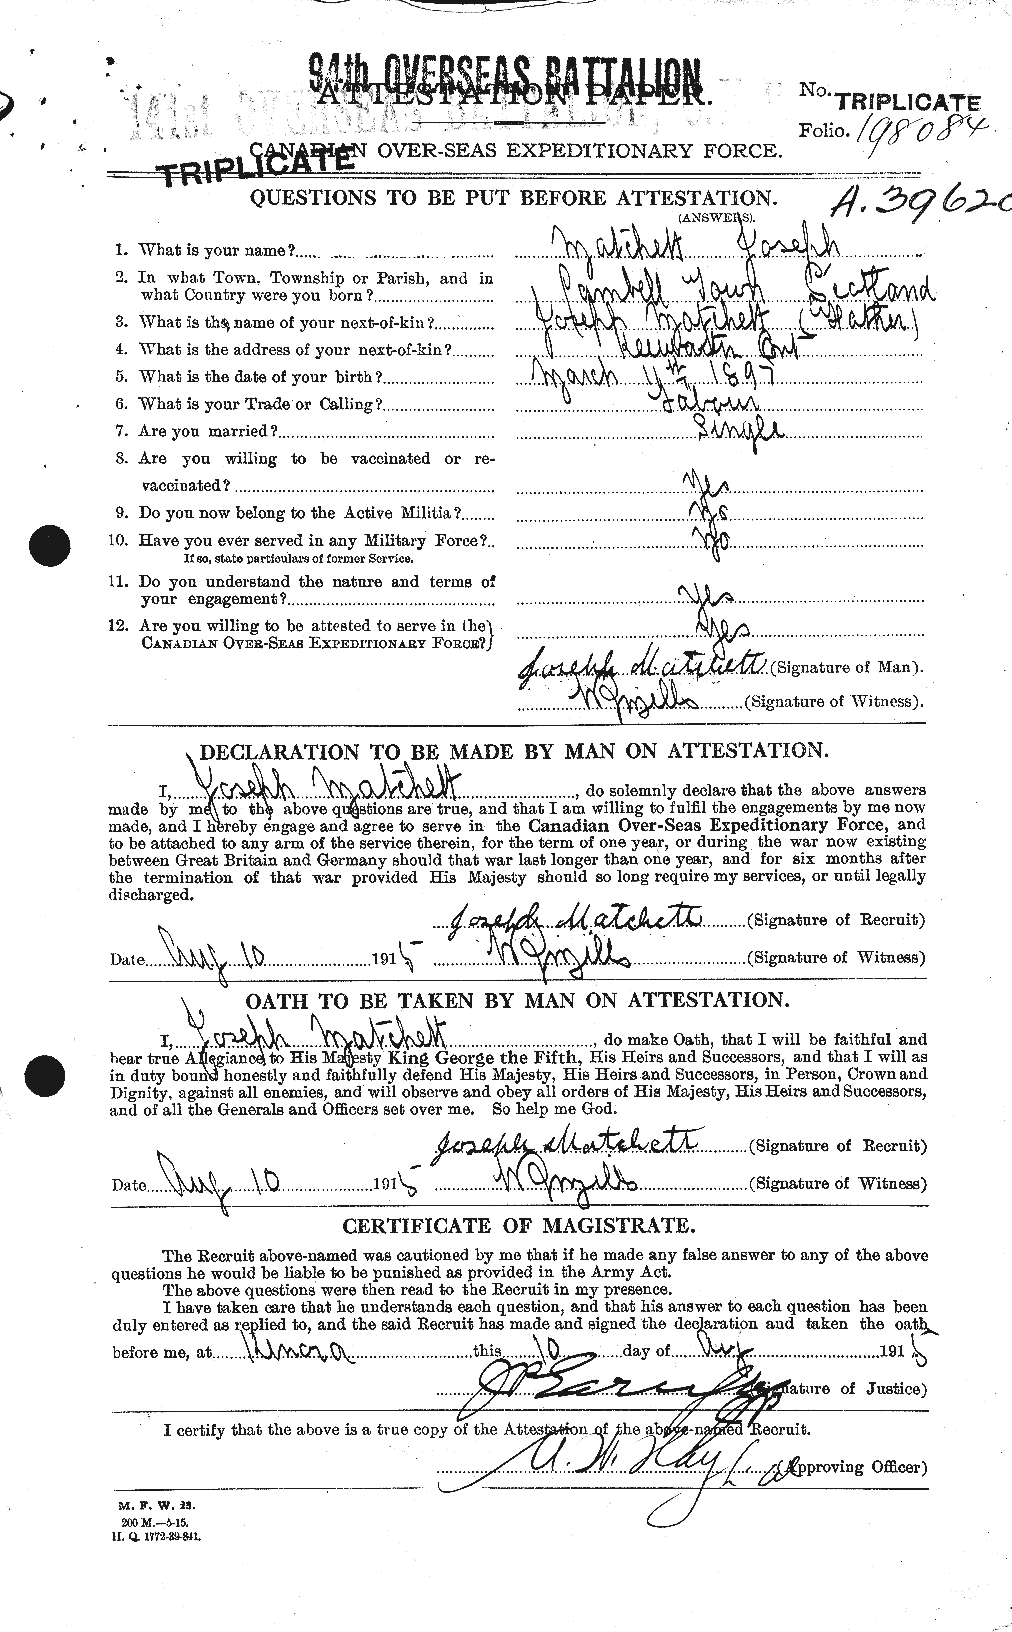 Personnel Records of the First World War - CEF 488583a